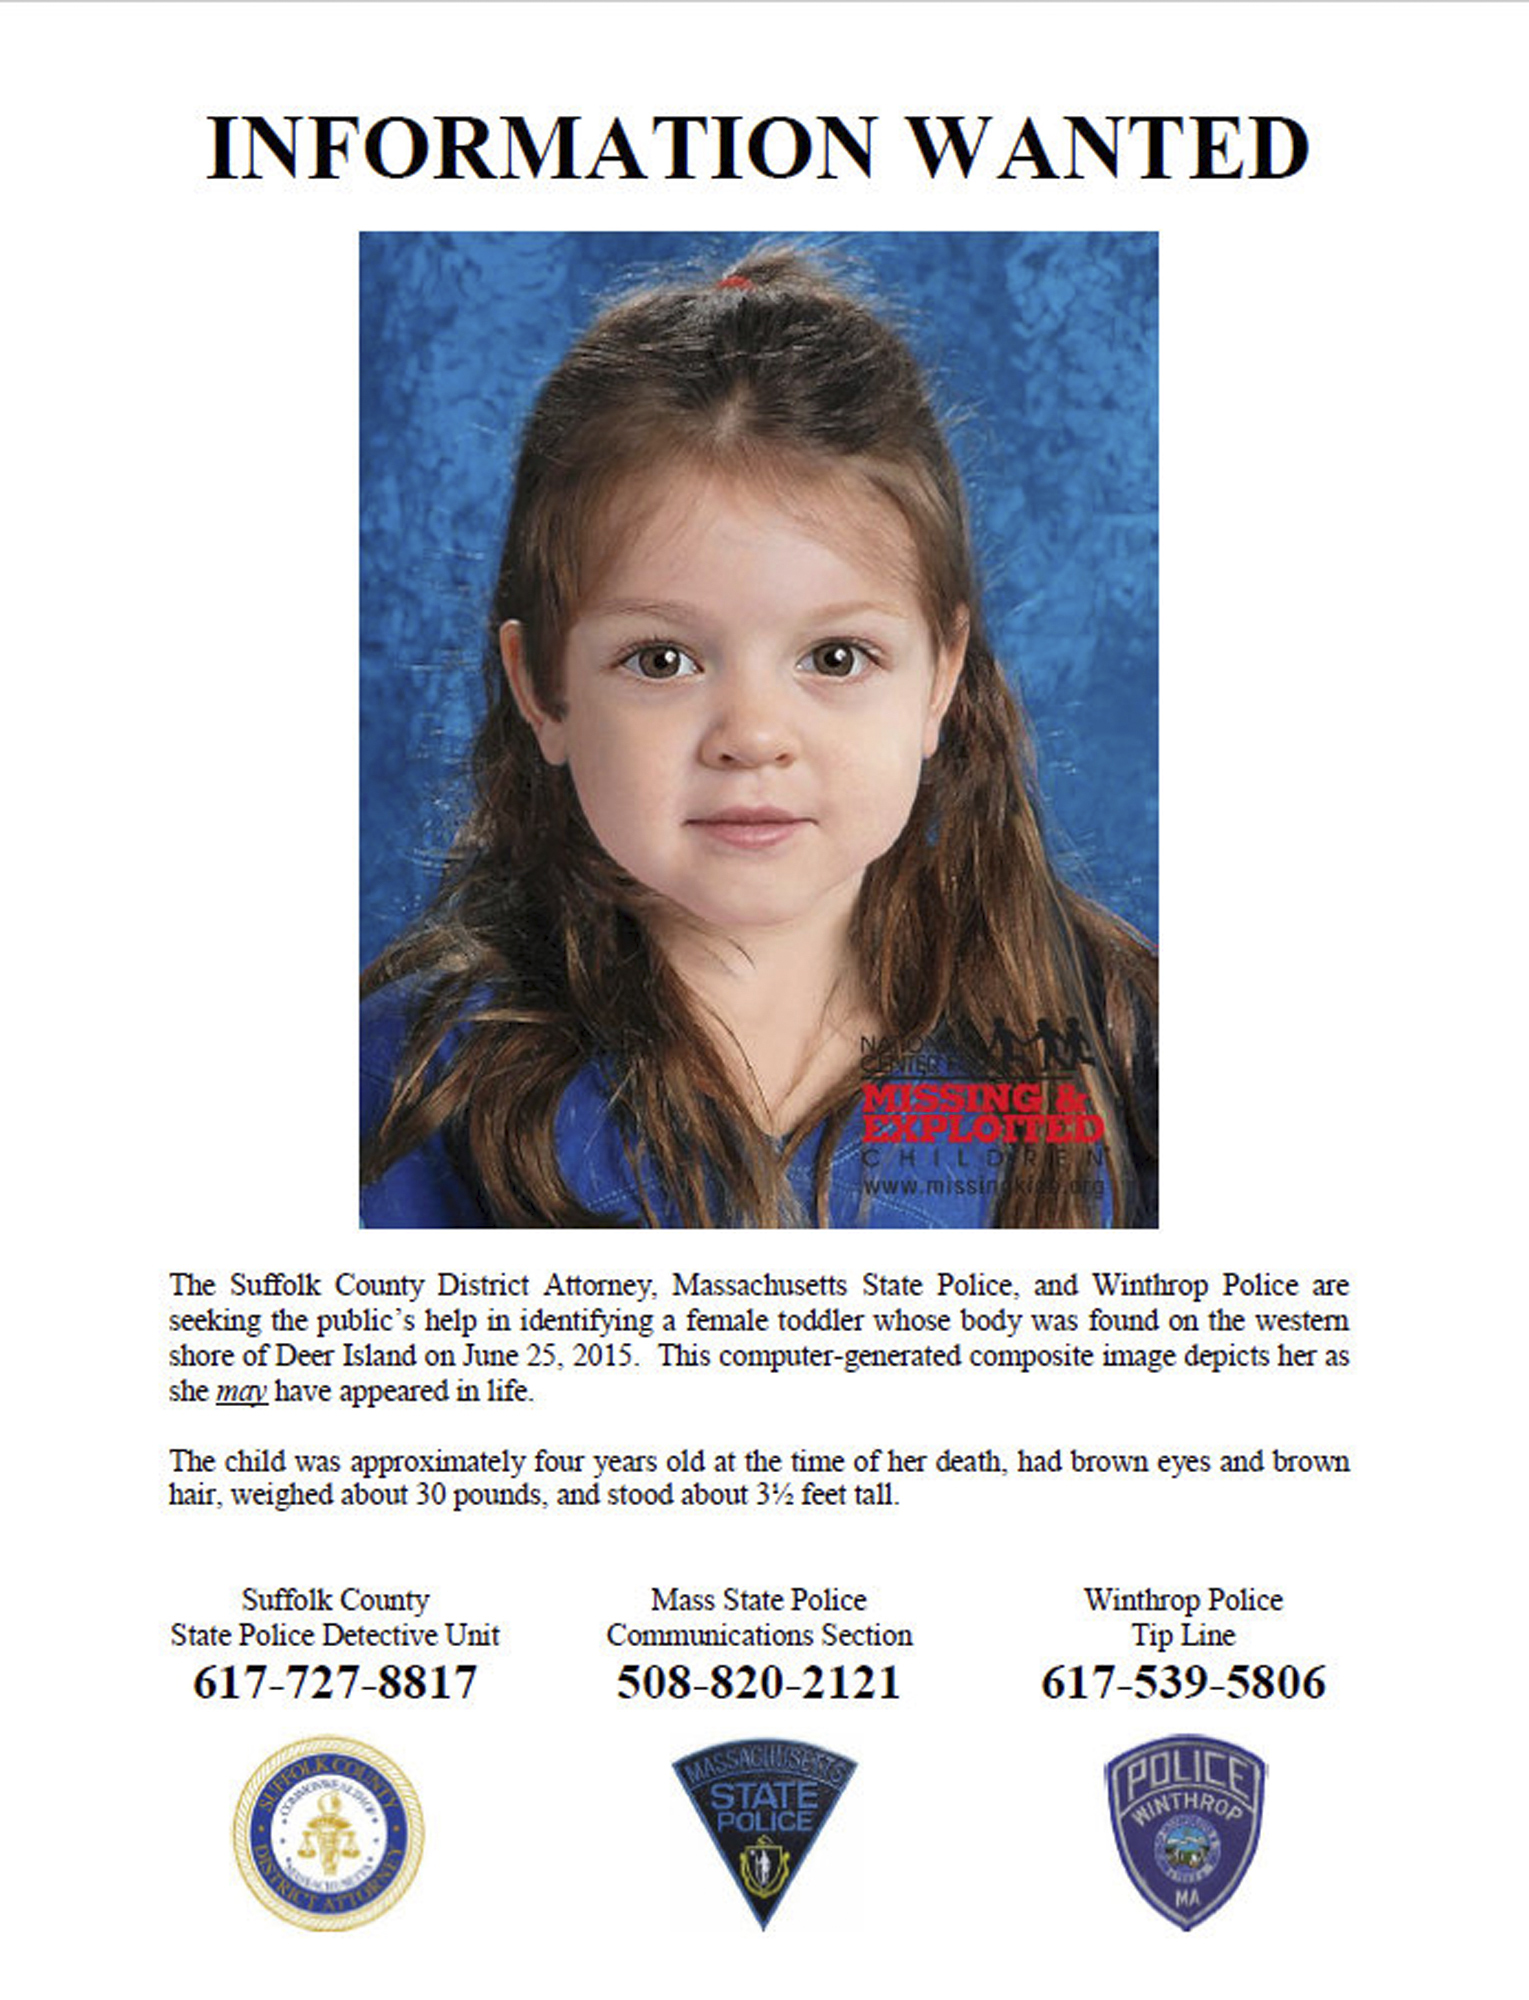 This flyer released on July 2, 2015, includes a computer-generated composite image depicting the possible likeness of a young girl, whose body was found on the shore of Deer Island in Boston Harbor on June 25, 2015. (Suffolk County District Attorney/AP)